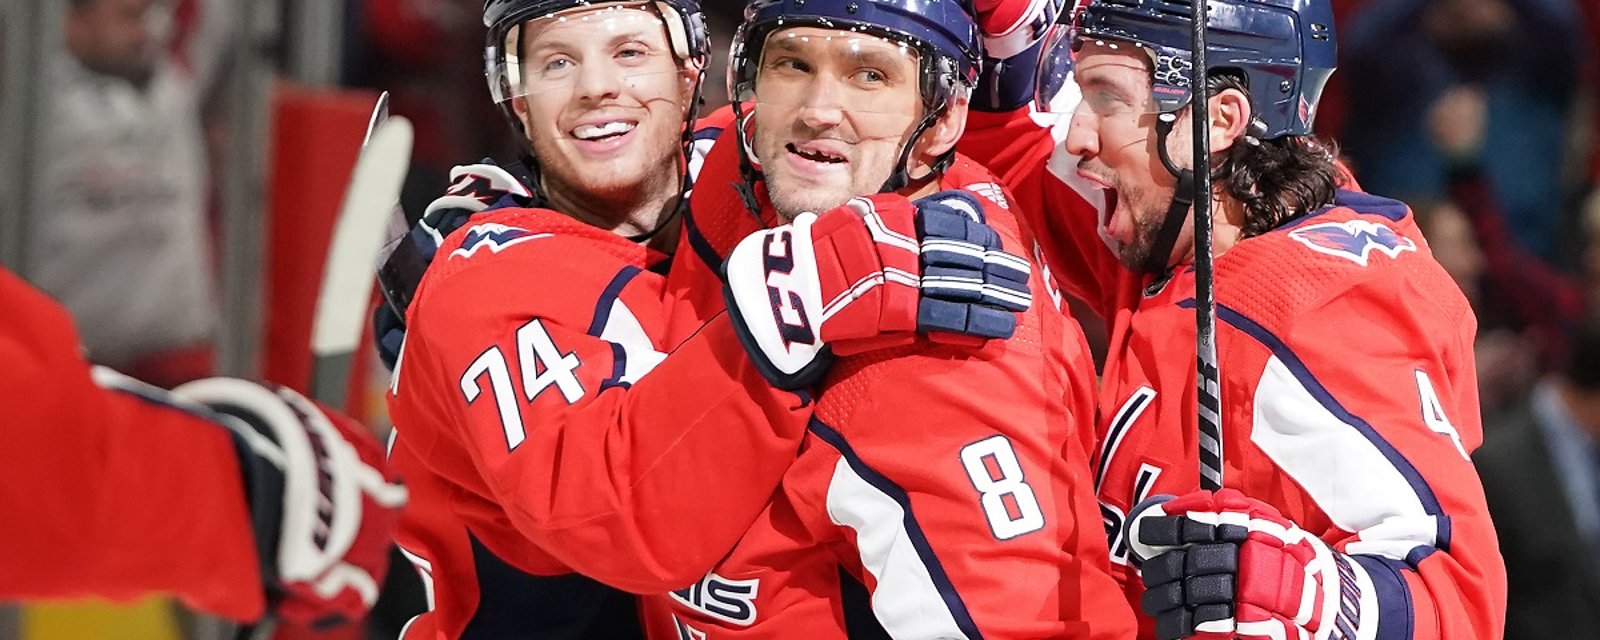 Ovechkin mic'd up for goal #700.